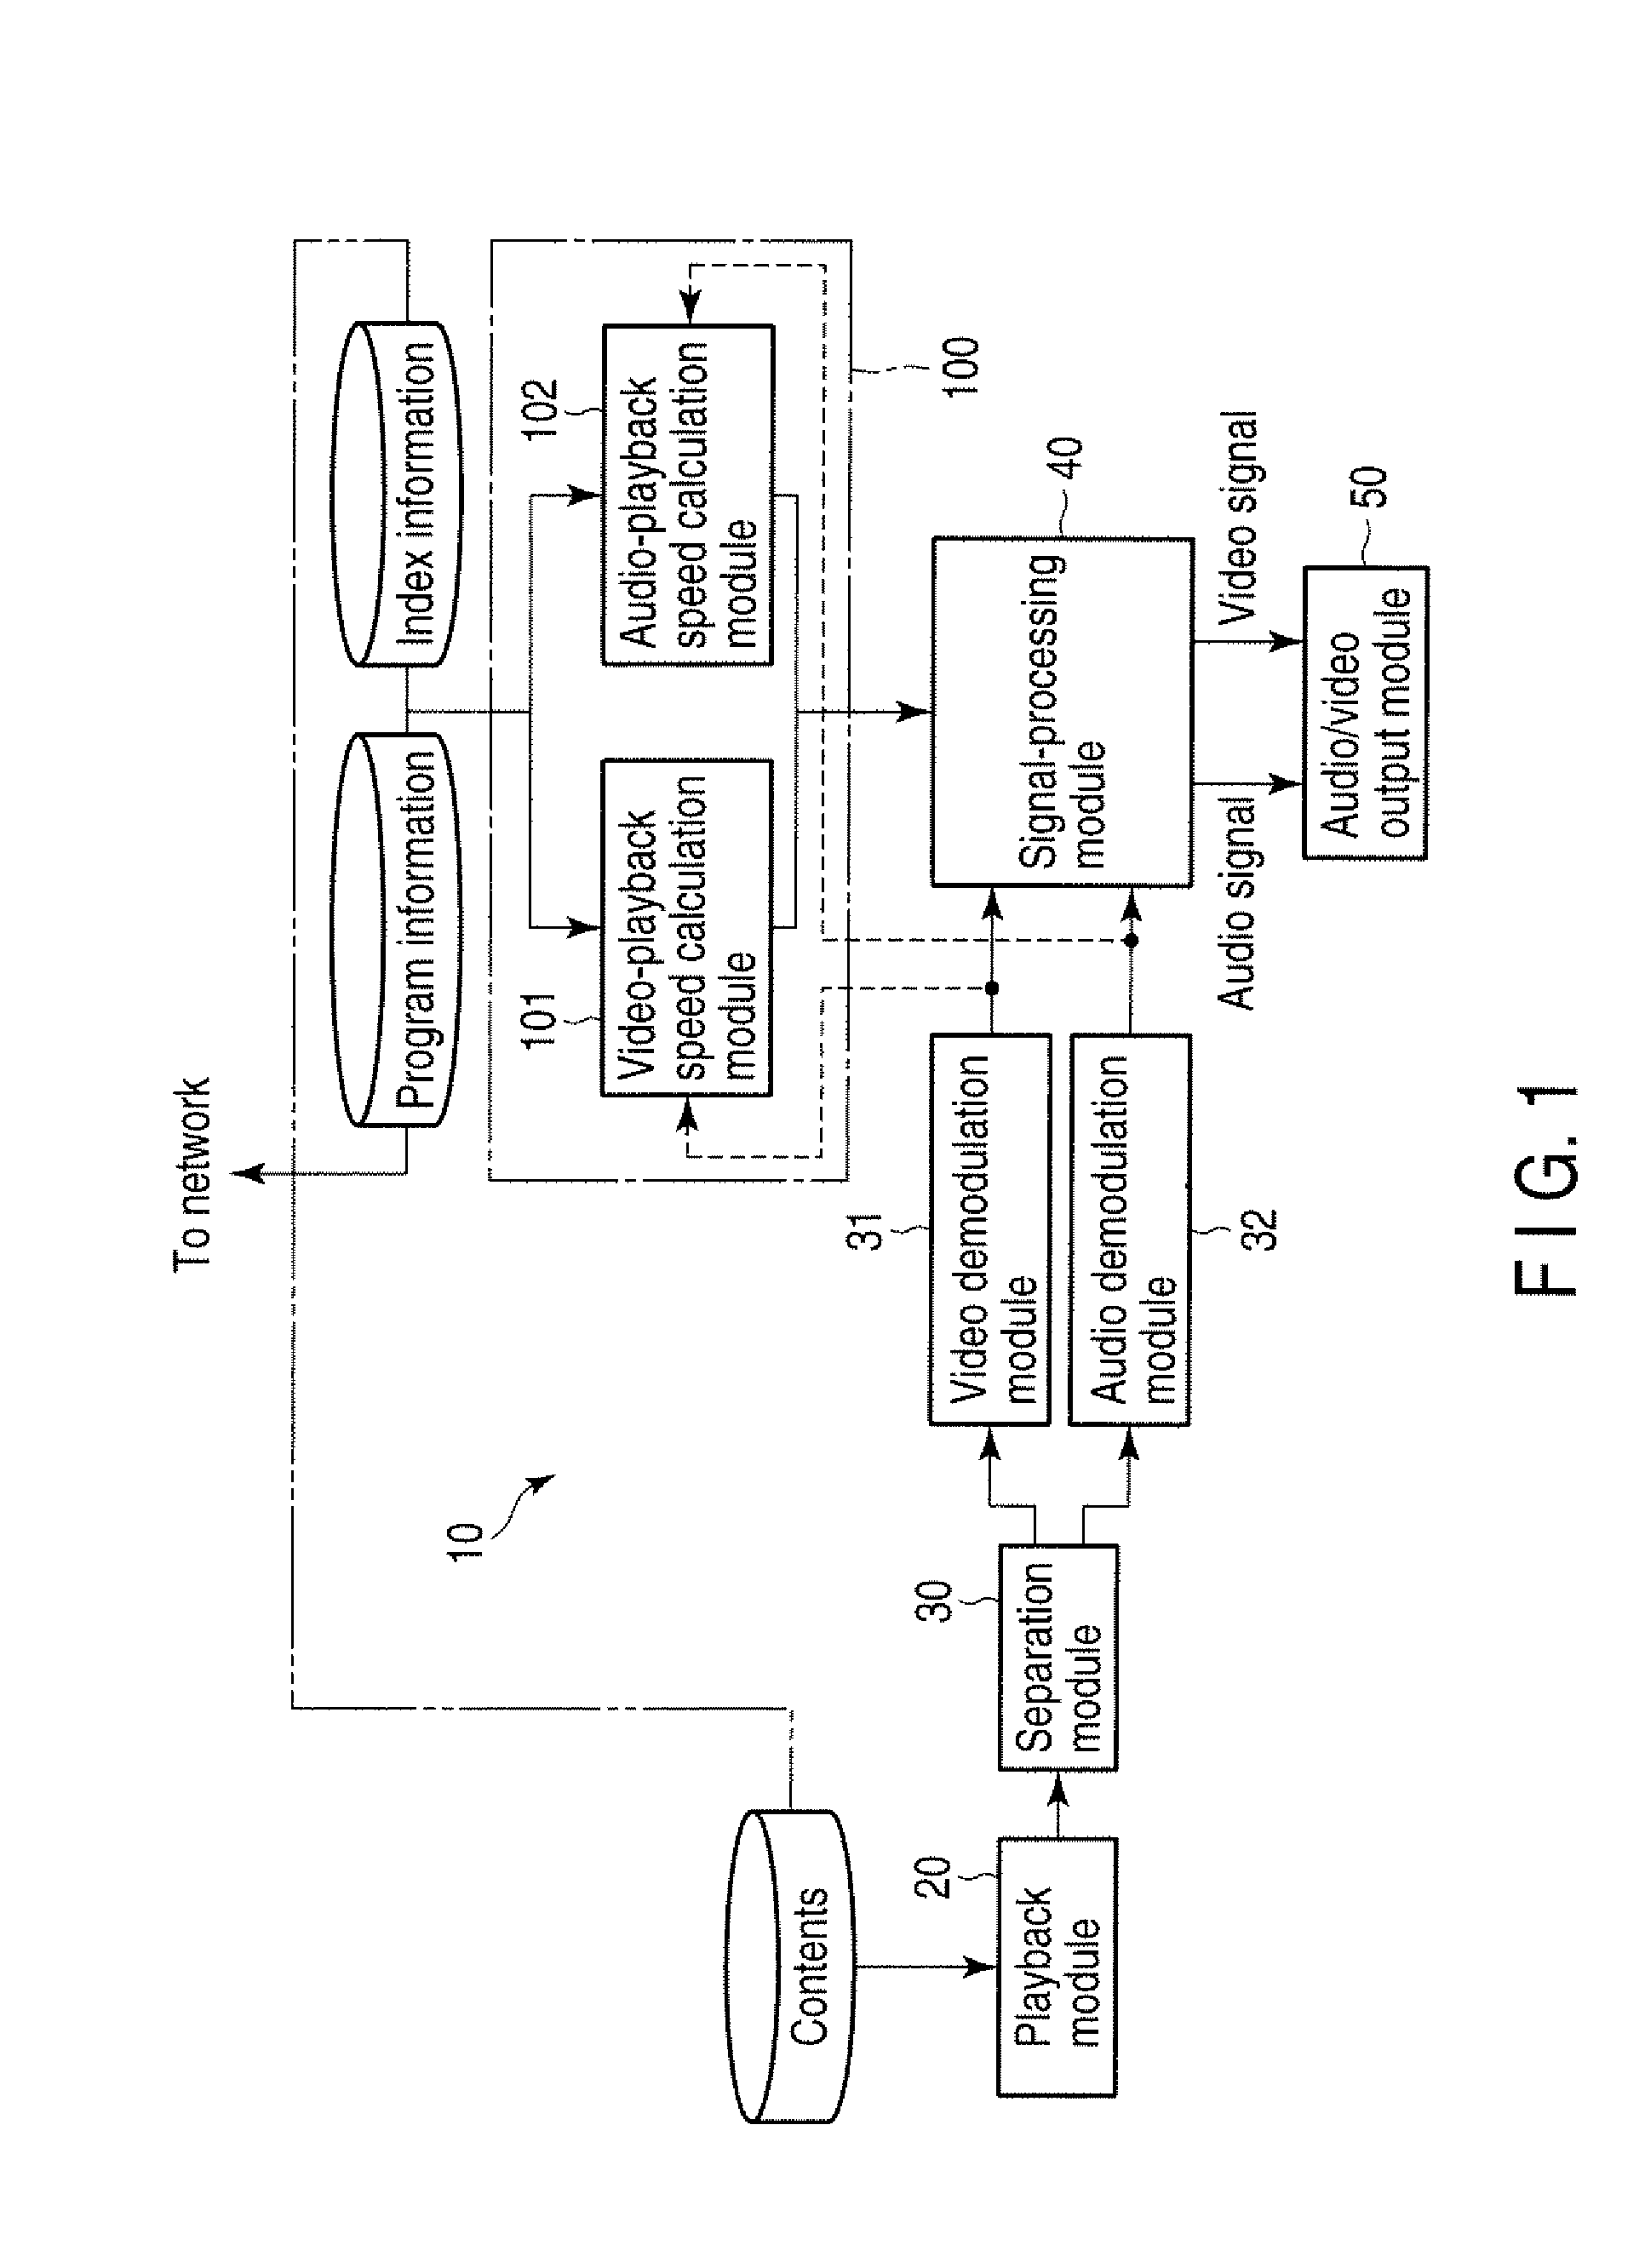 Method and Apparatus for Reproducing Video and Audio